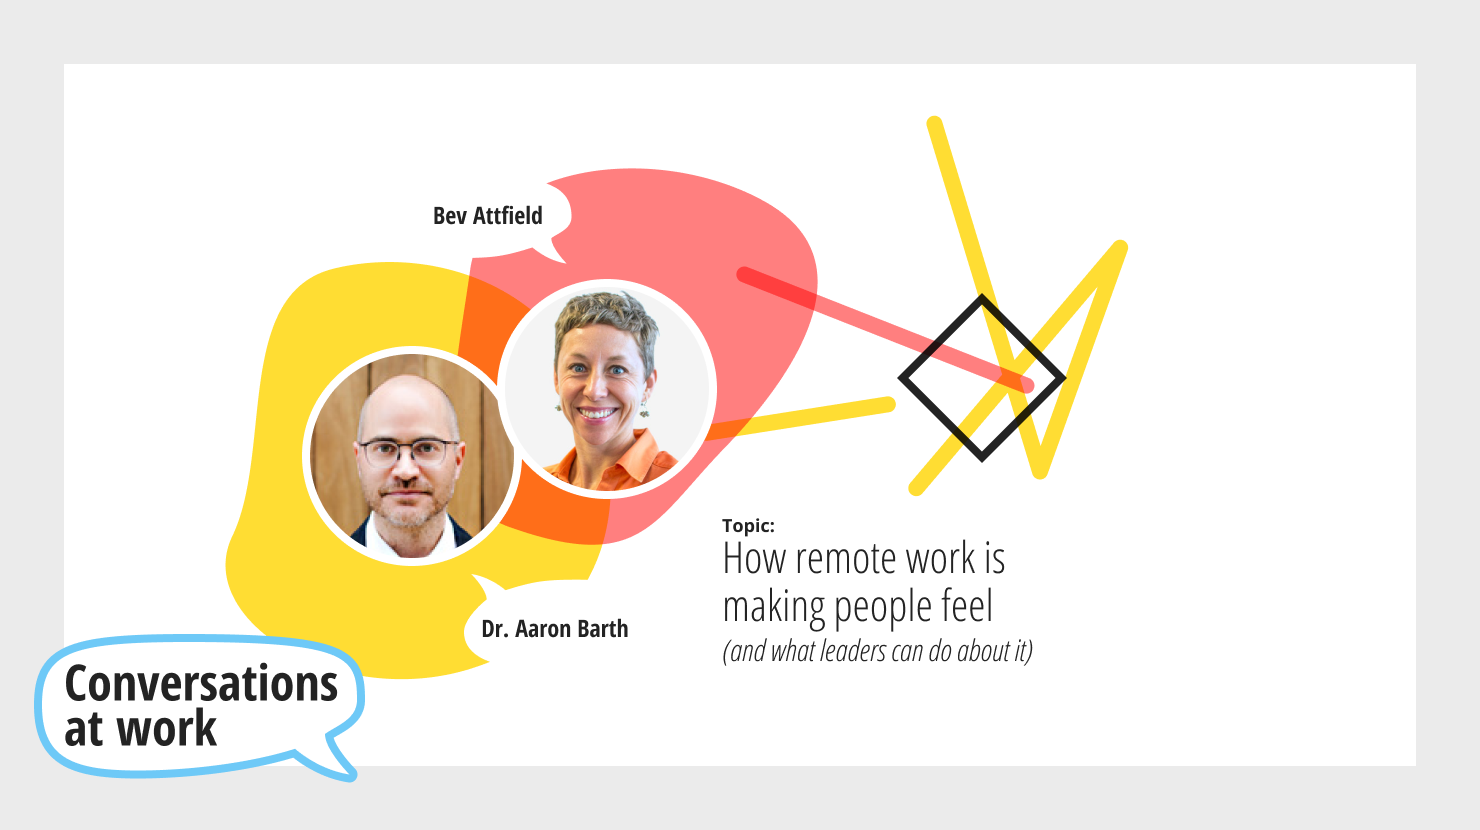 How remote work is making people feel (and what leaders can do about it)